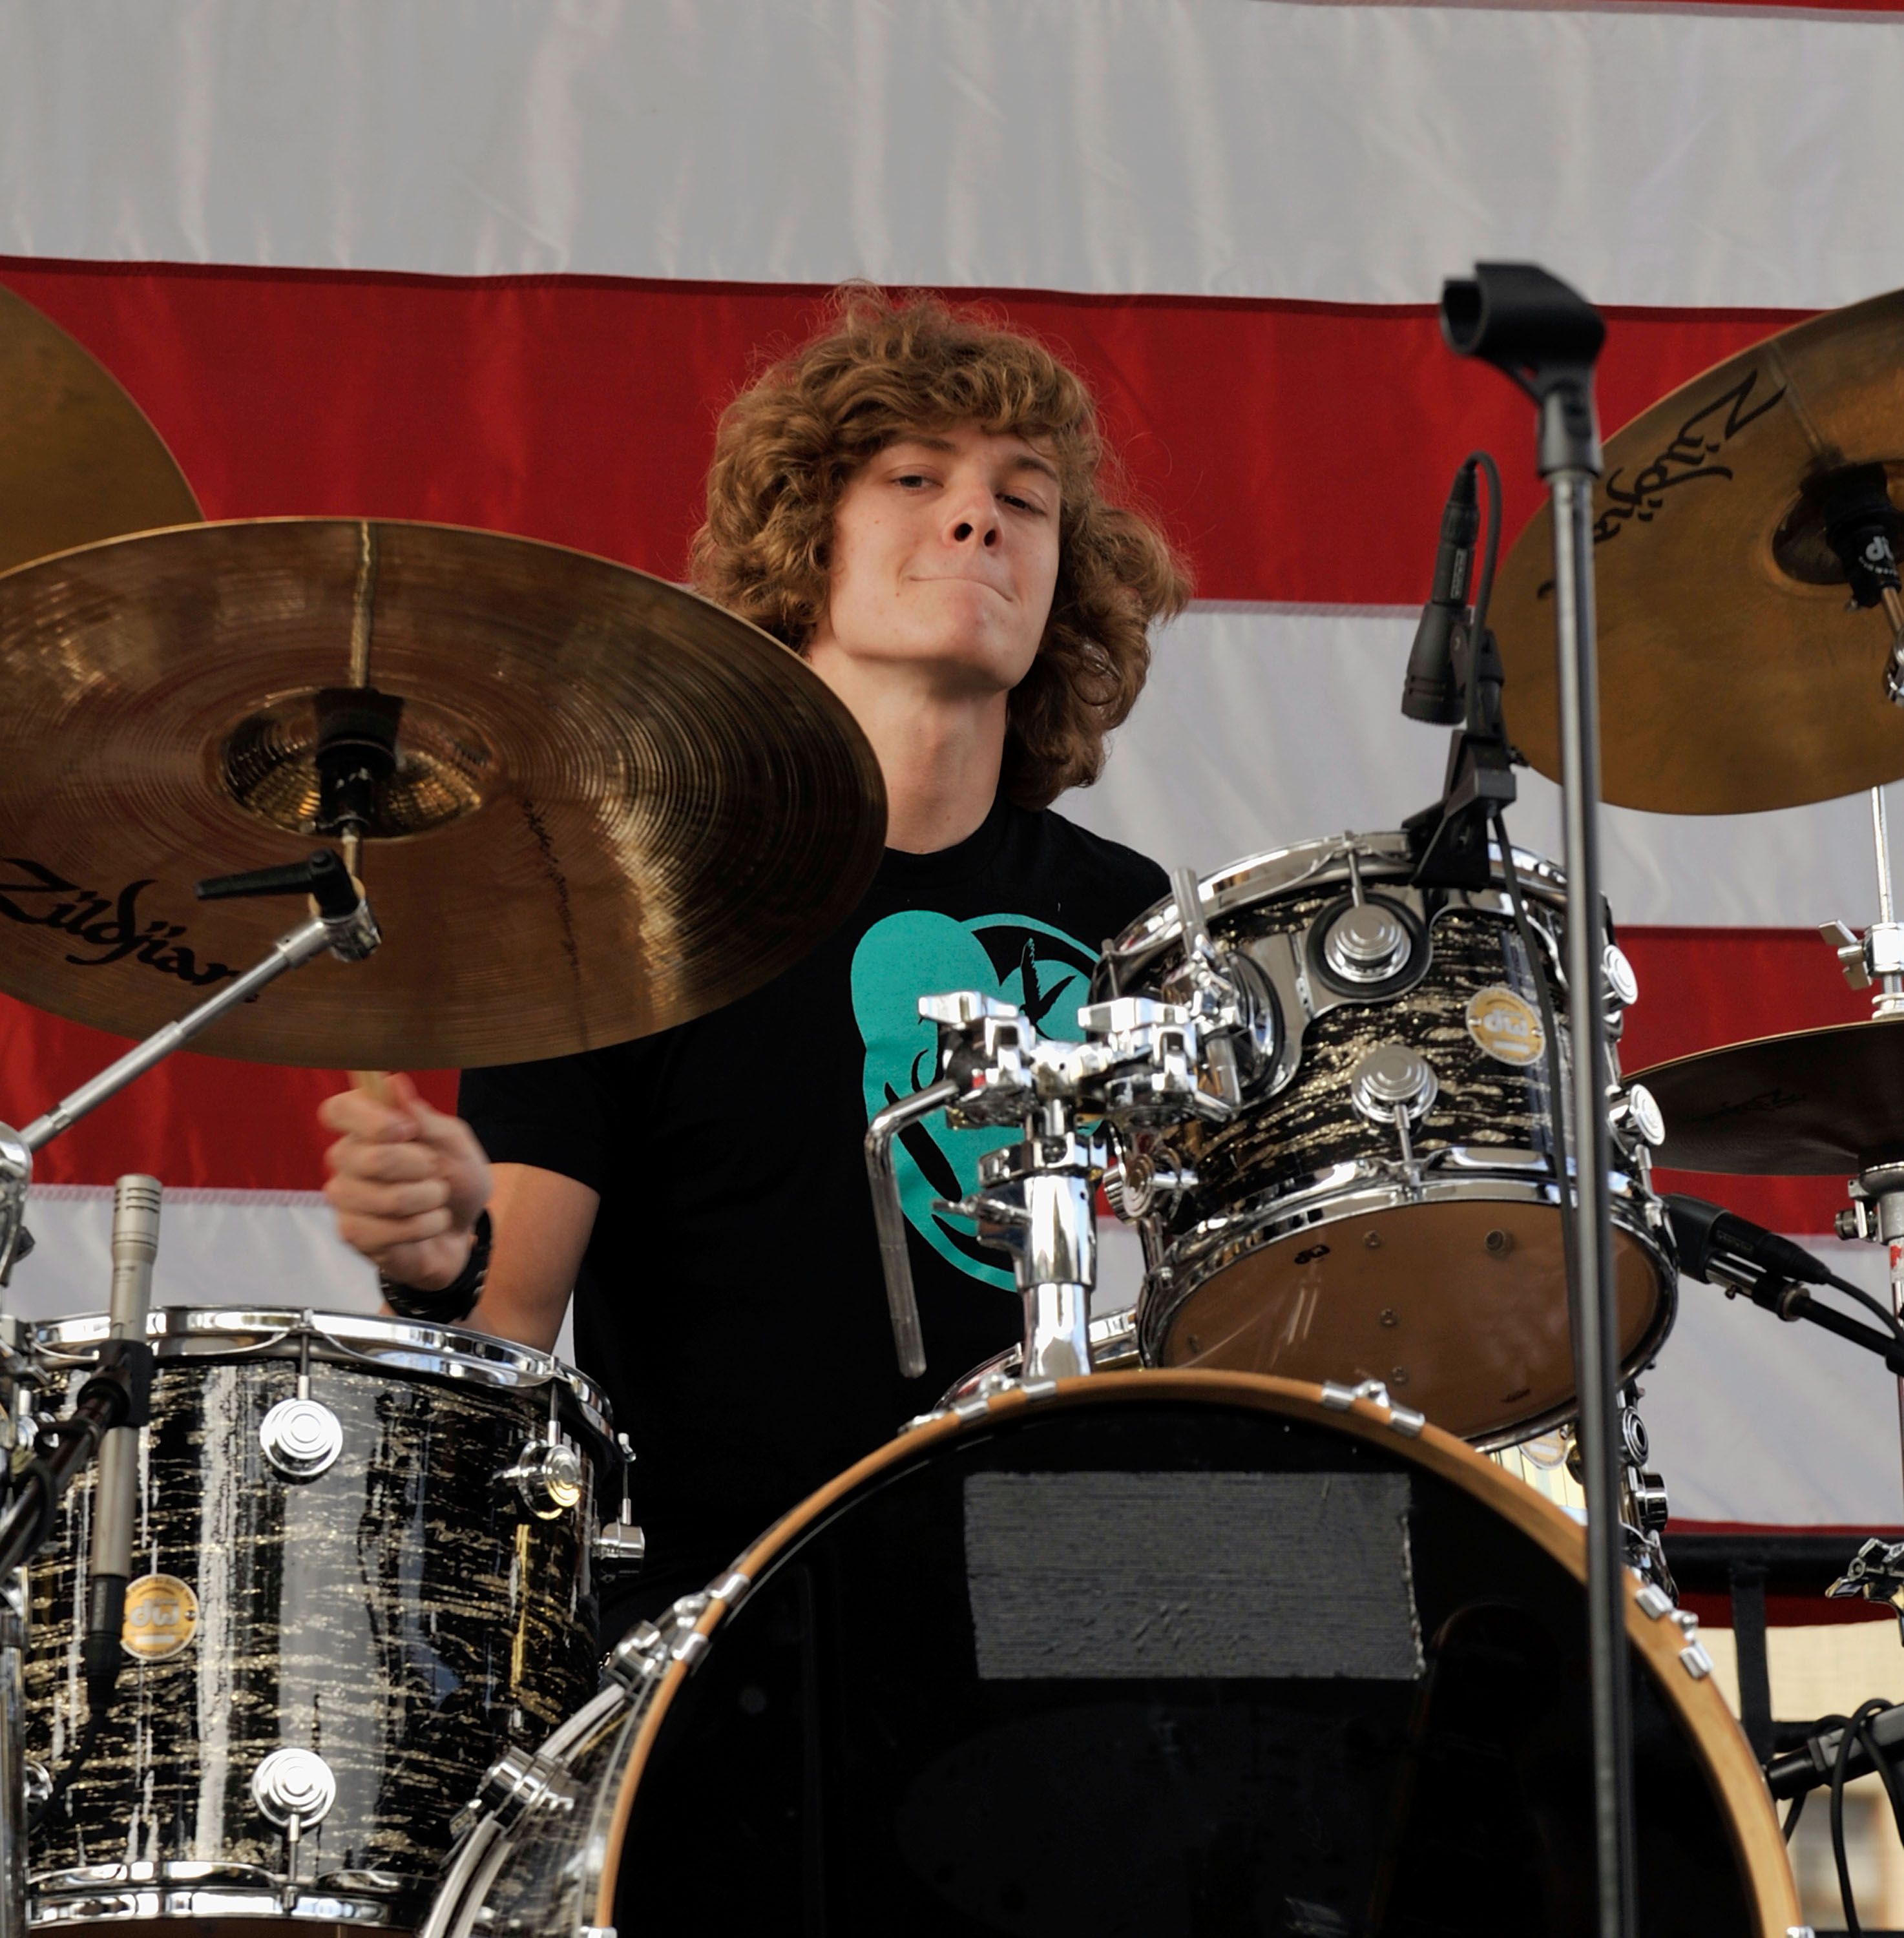 "Mac" Sinise plays the drums with his father, Gary Sinise's Lt. Dan Band at the USO's Road 2 Recovery on October 4, 2008, at the Wadsworth Theater Parking Lot in Los Angeles, California. The Road 2 Recovery Program helps support severely wounded veterans from the war in Iraq | Source: Getty Images